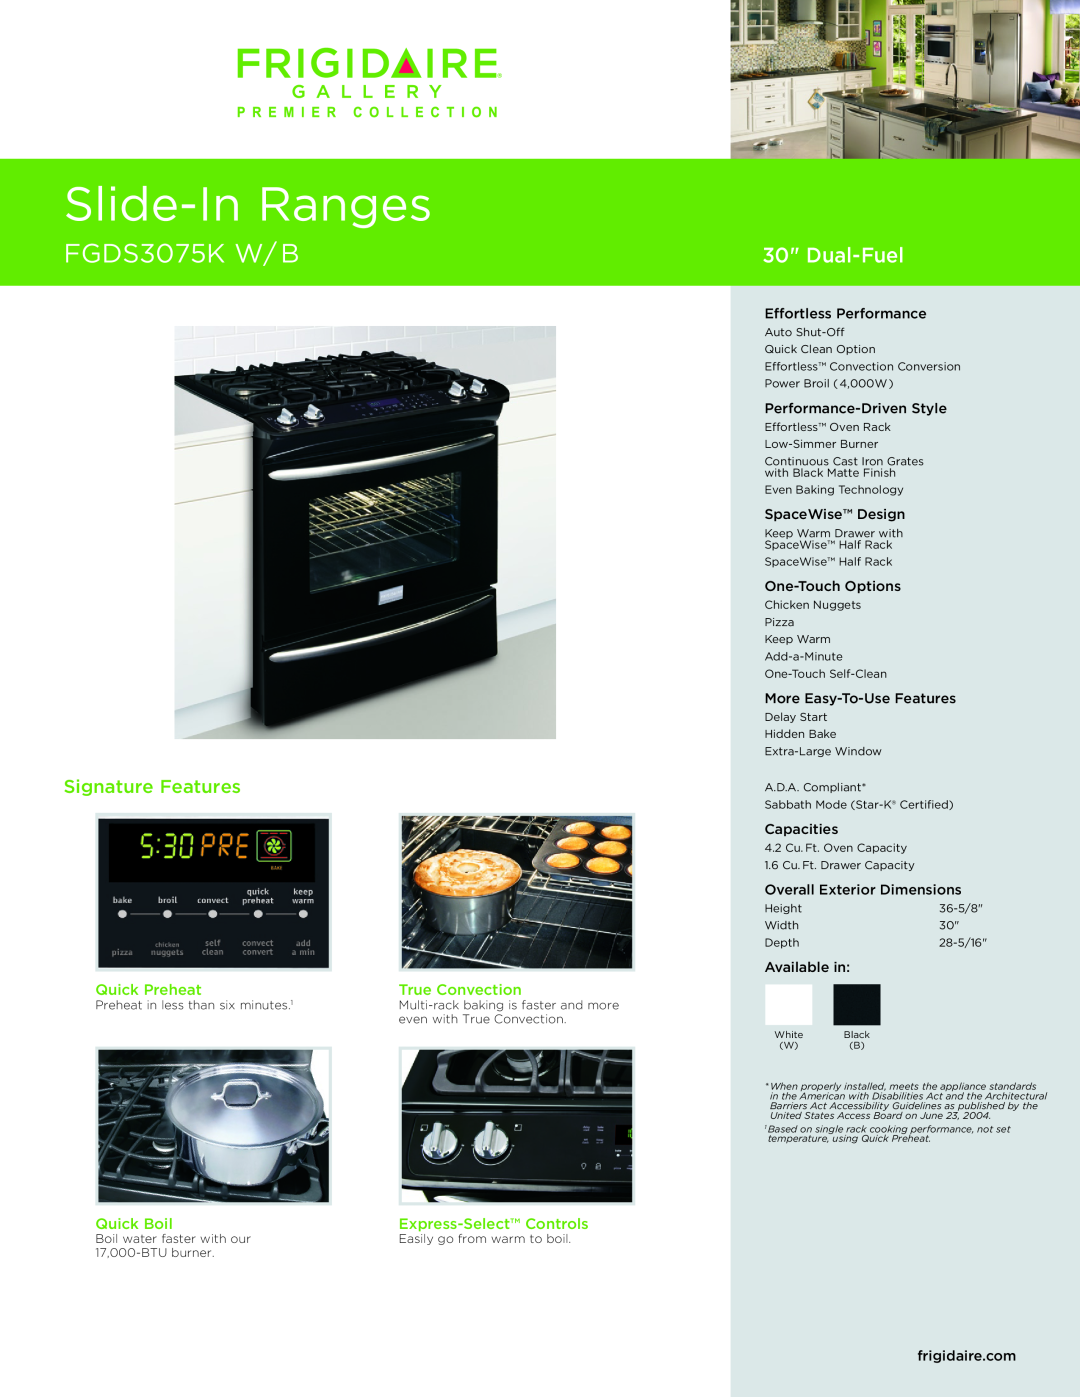 Frigidaire FGDS3075K W/B dimensions Effortless Performance, Performance-DrivenStyle, SpaceWise Design, One-TouchOptions 